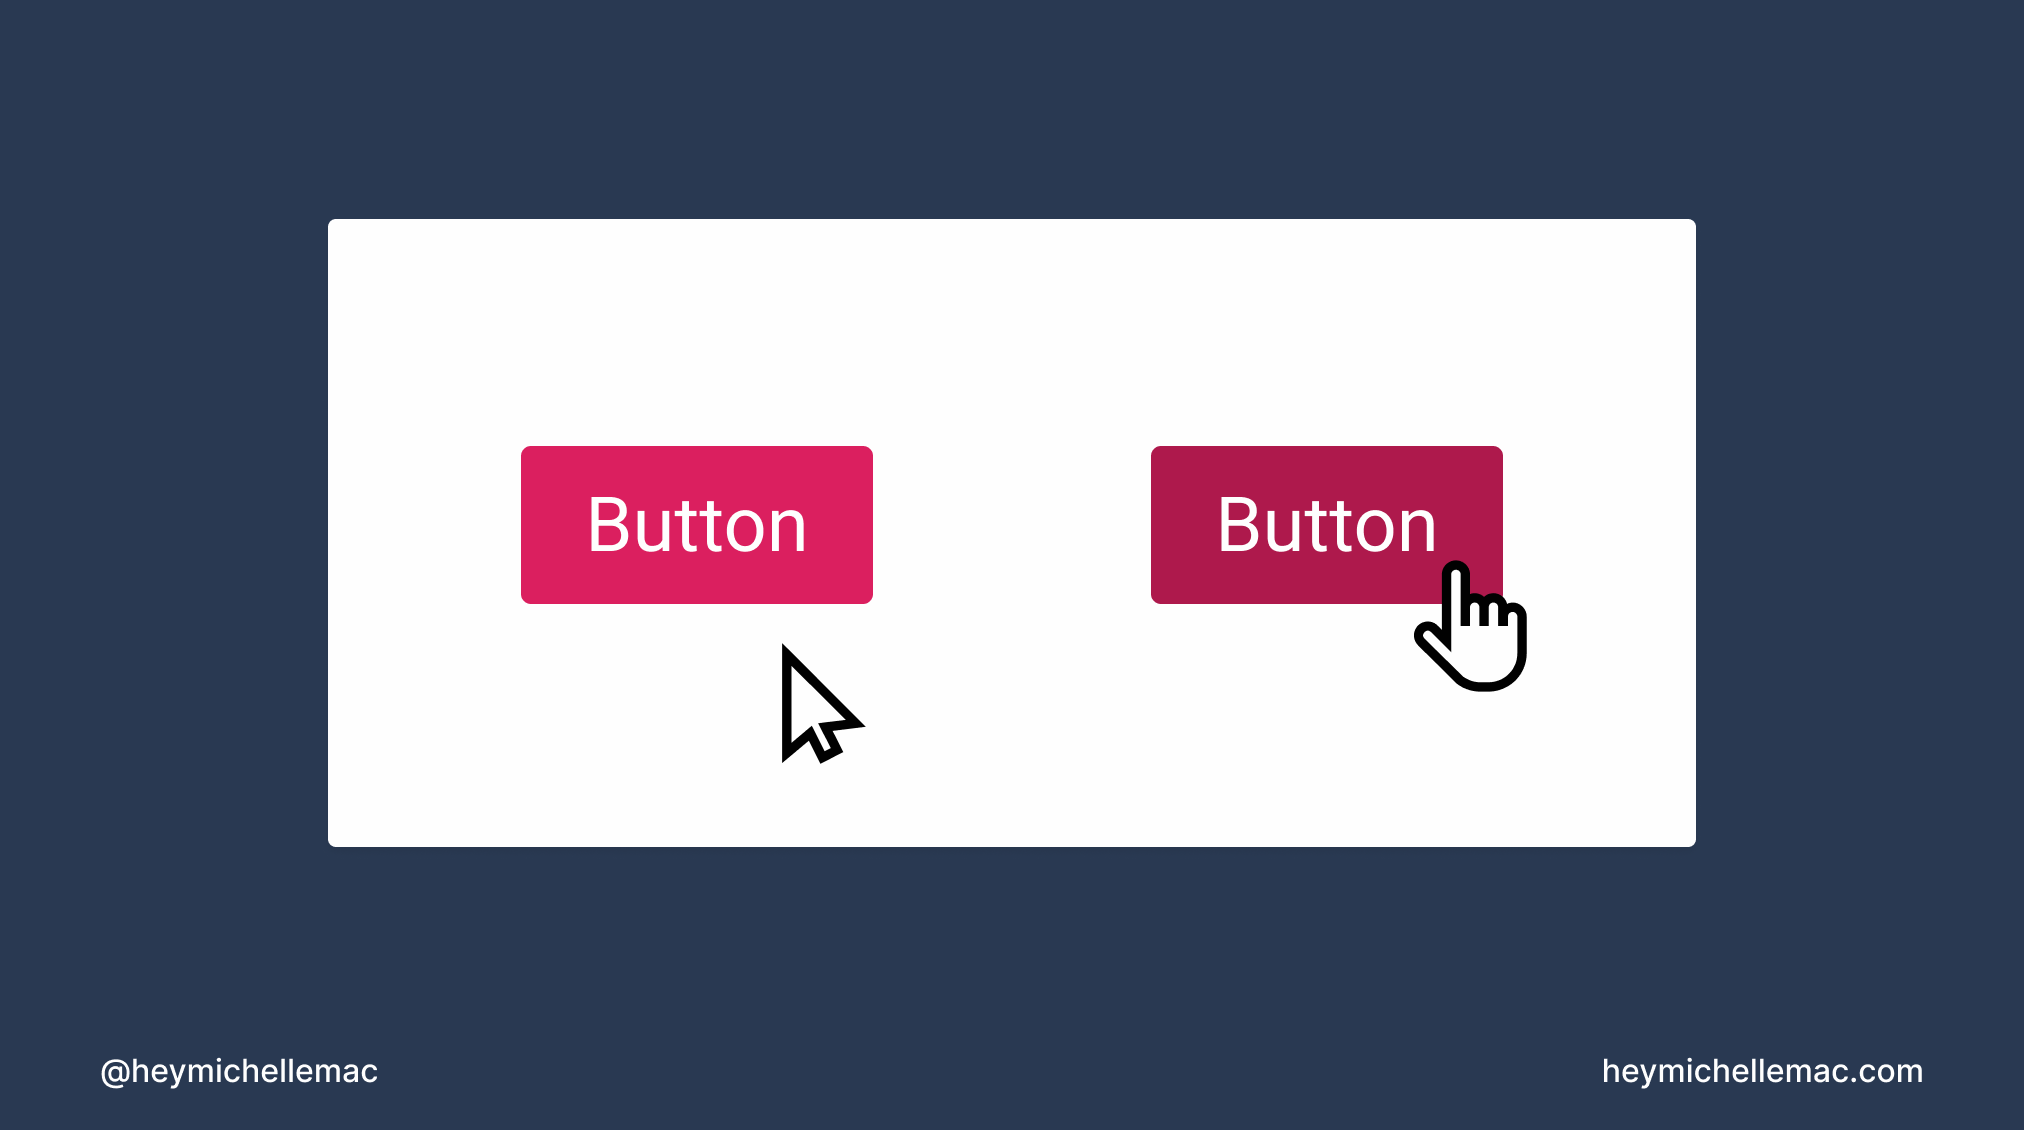 Incorrect mouse cursor for various interactions